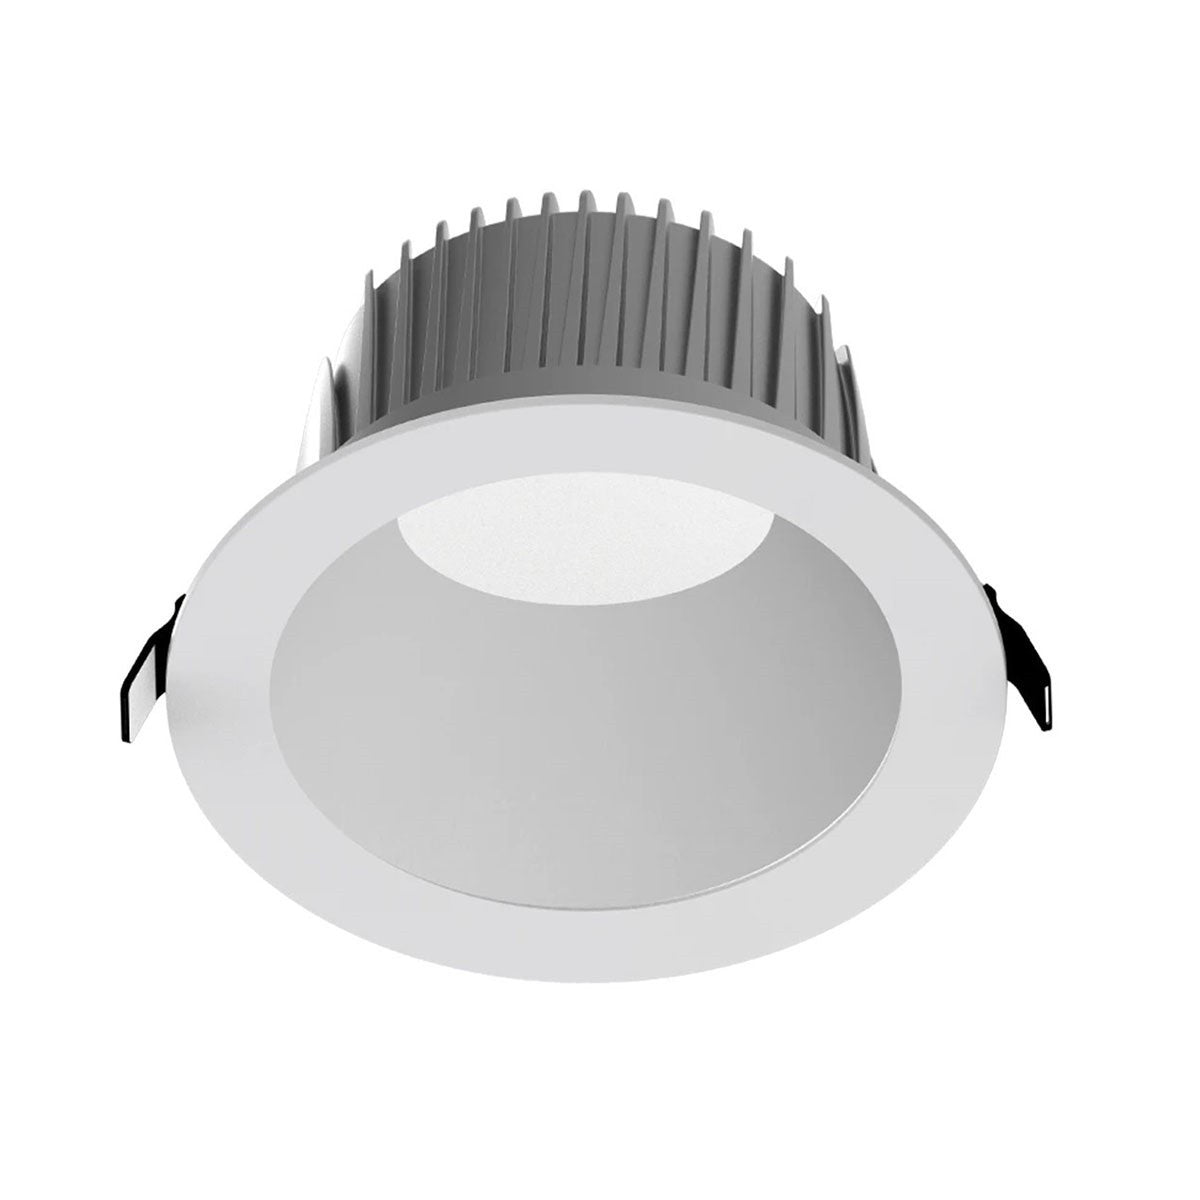 8 Inch LED Deep Regress Commercial Downlight, Field Adjustable 34/46/59W, 2400/3200/4000 Lumens, 30/35/40/50K, Smooth Trim, Matte Silver Finish